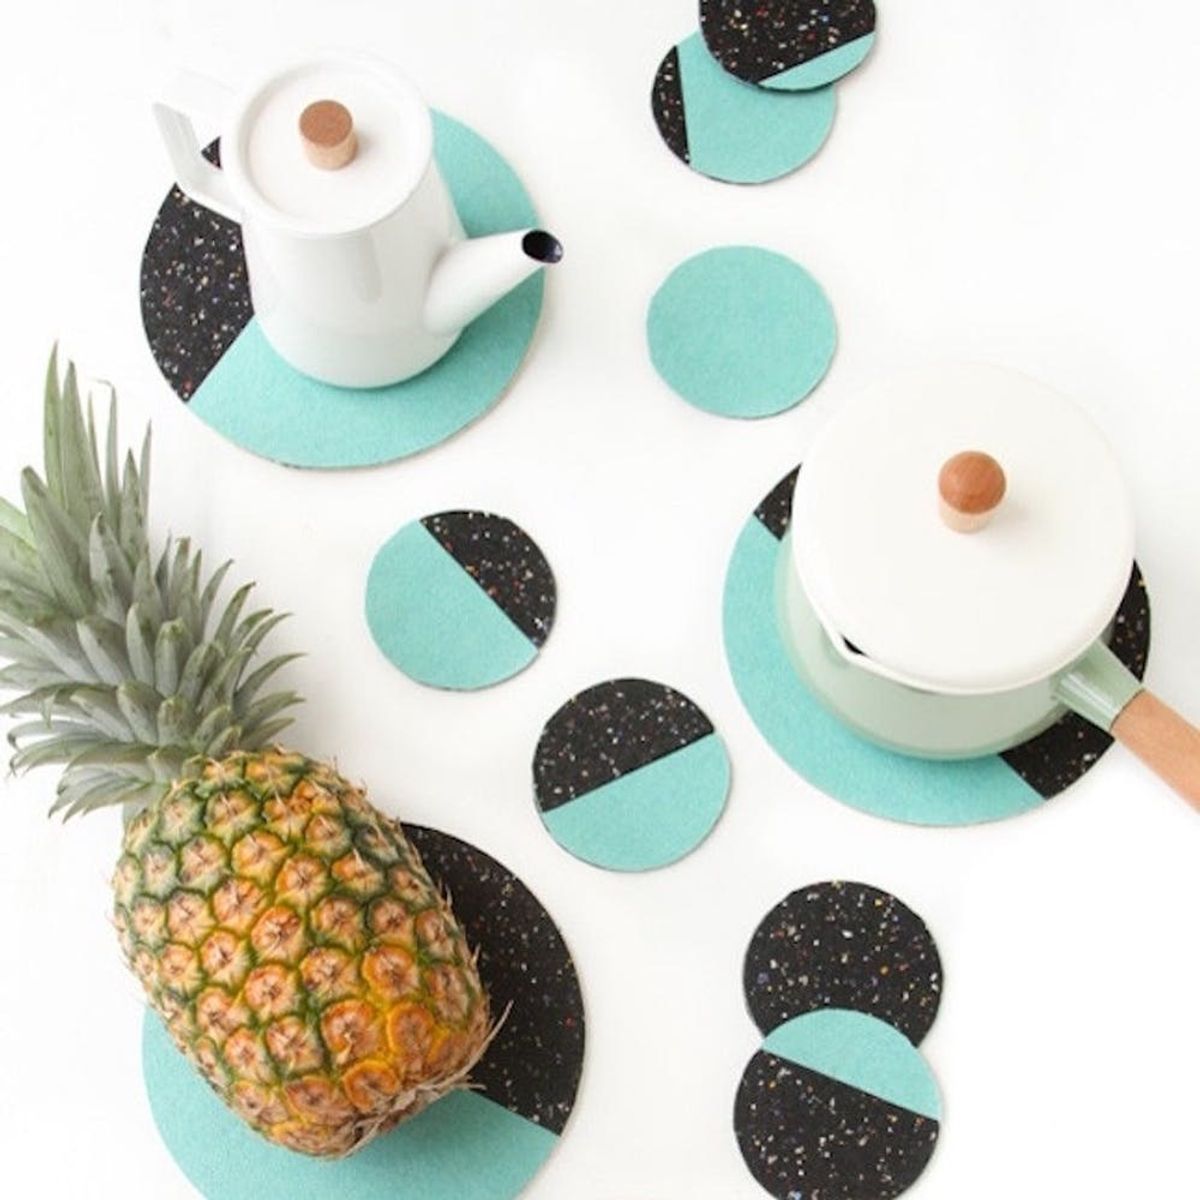 24 DIYs to Freshen Up Your Kitchen Decor for Spring